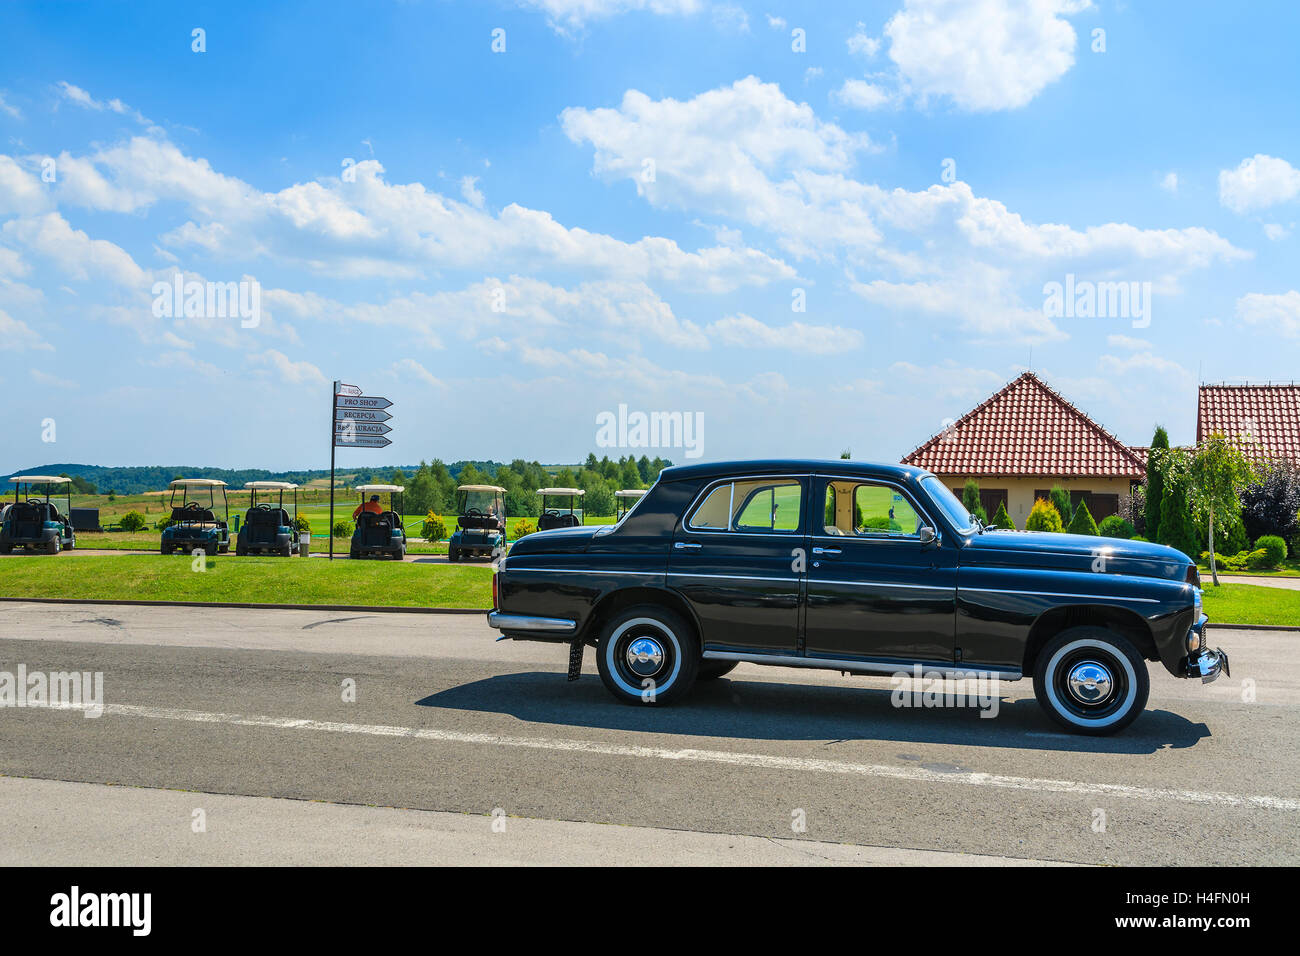 PACZULTOWICE GOLF CLUB, POLAND - AUG 9, 2014: old classic black car parks on street in Paczultowice Golf Club. Vintage cars are popular to drive people to weeding ceremony. Stock Photo